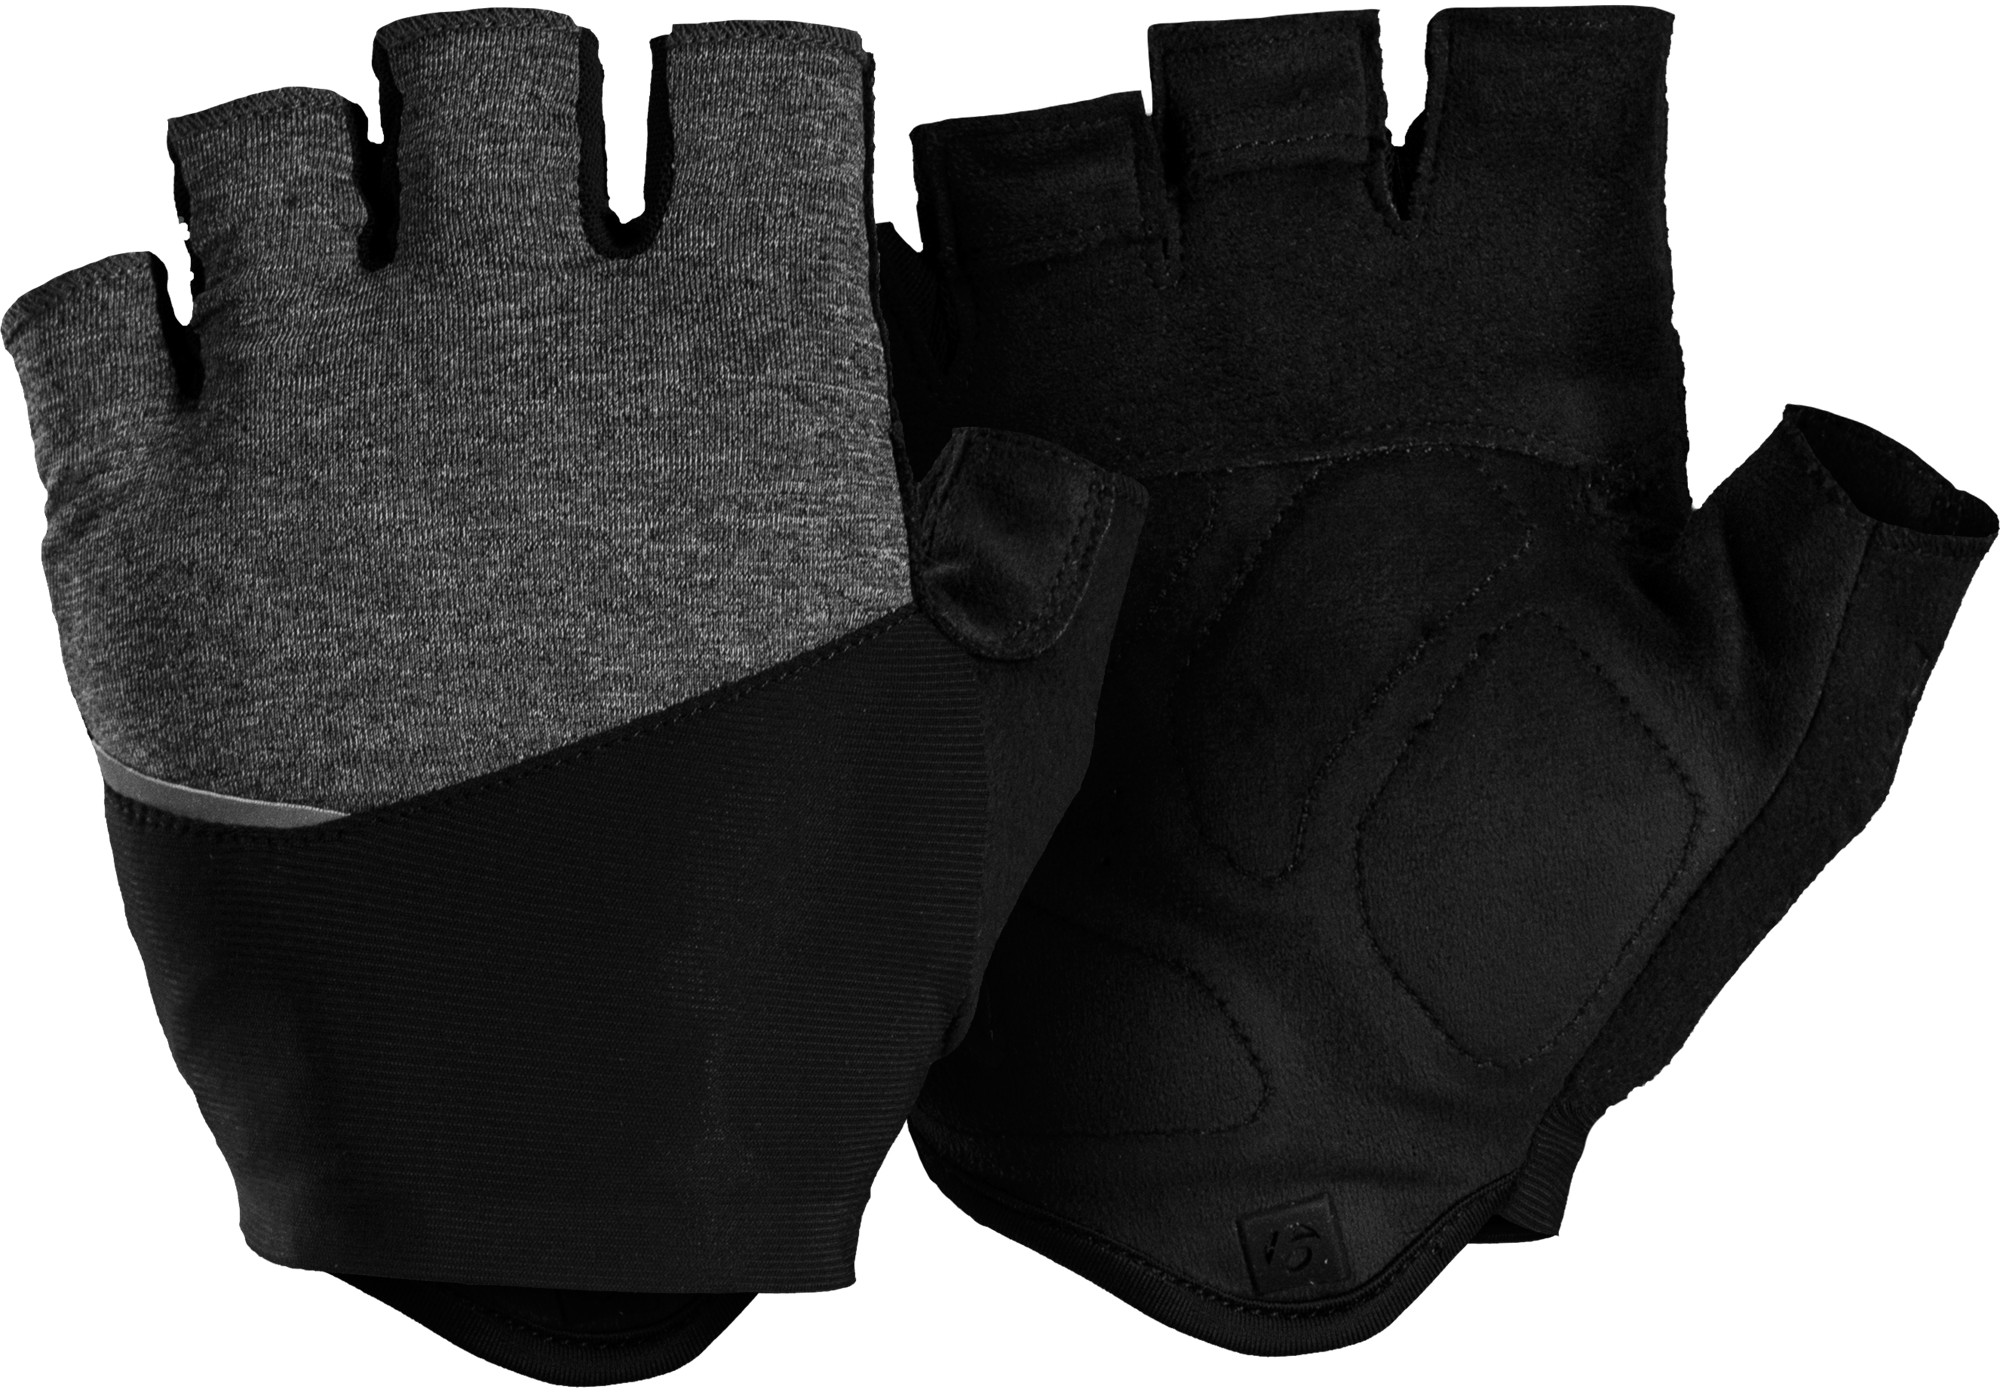 Bontrager Velocis Cycling Glove - Clothing - Shop | Nevis Cycles